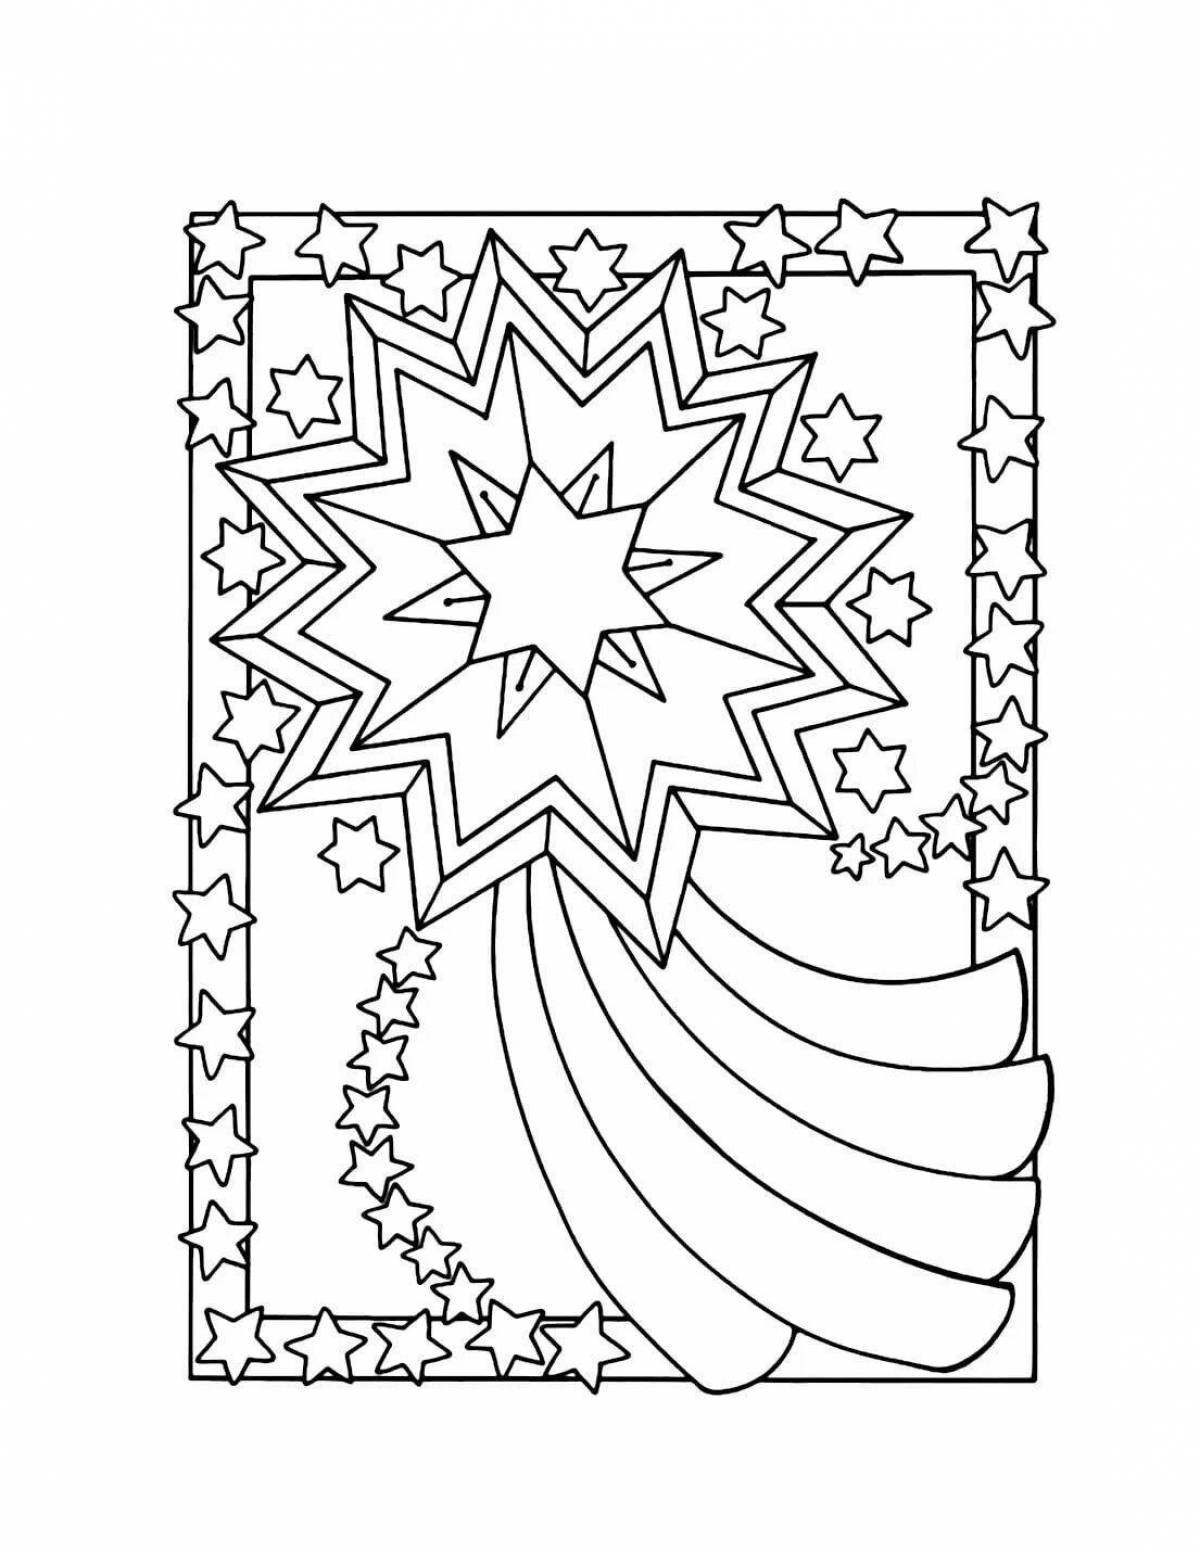 Adorable Christmas star coloring book for kids